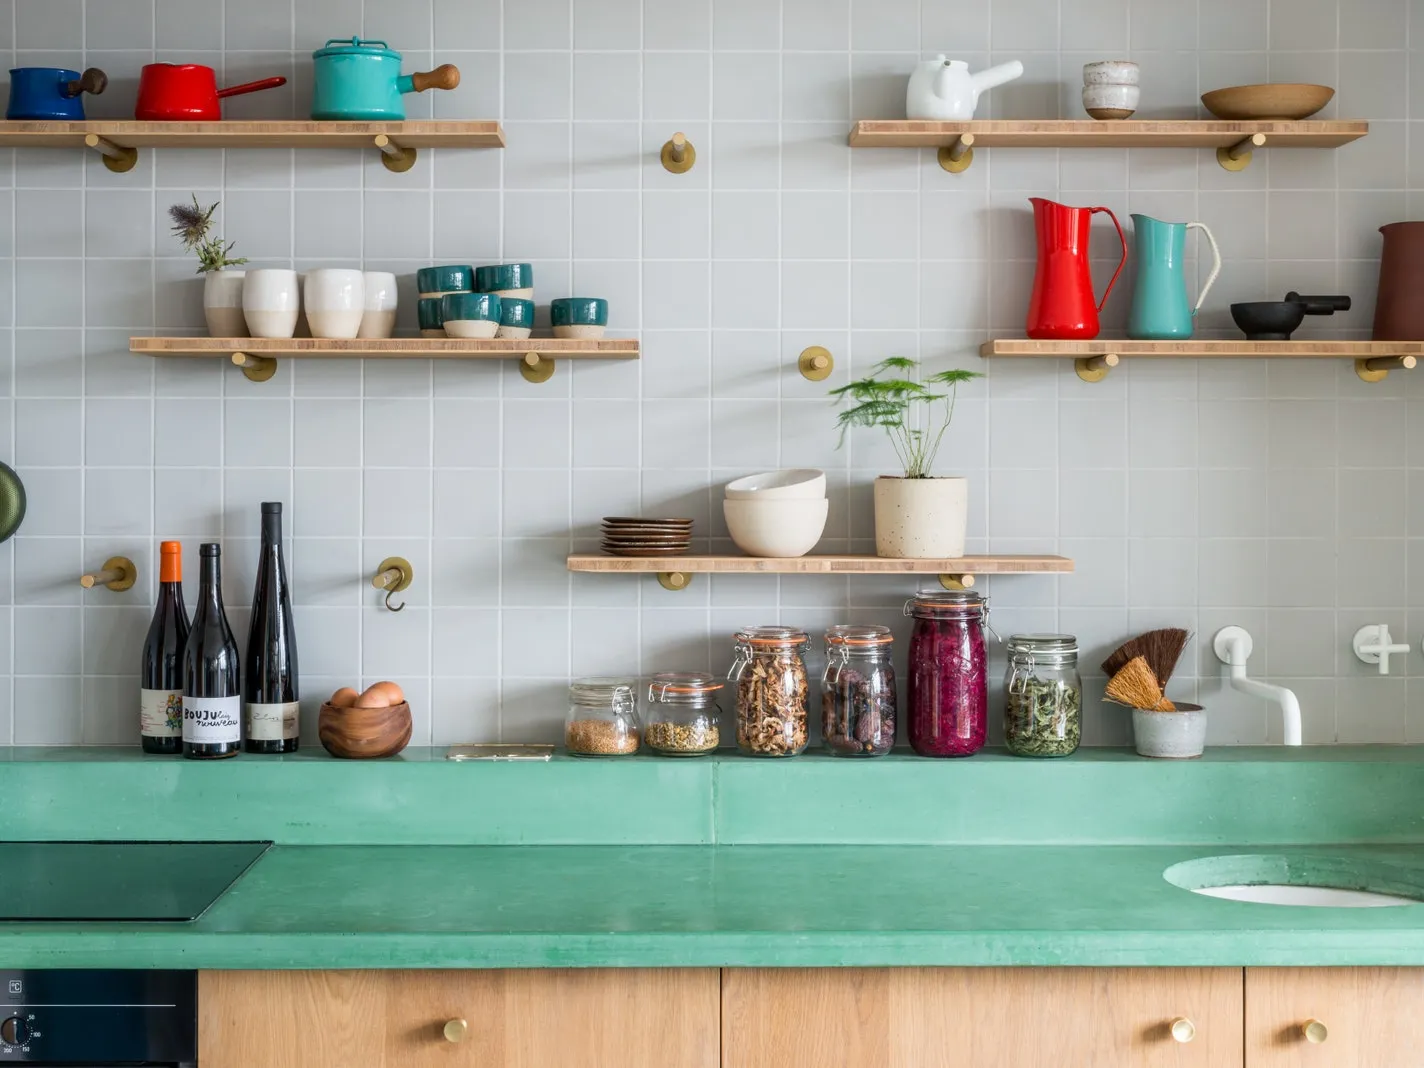 Want to save space in your kitchen? Here are some ideas!